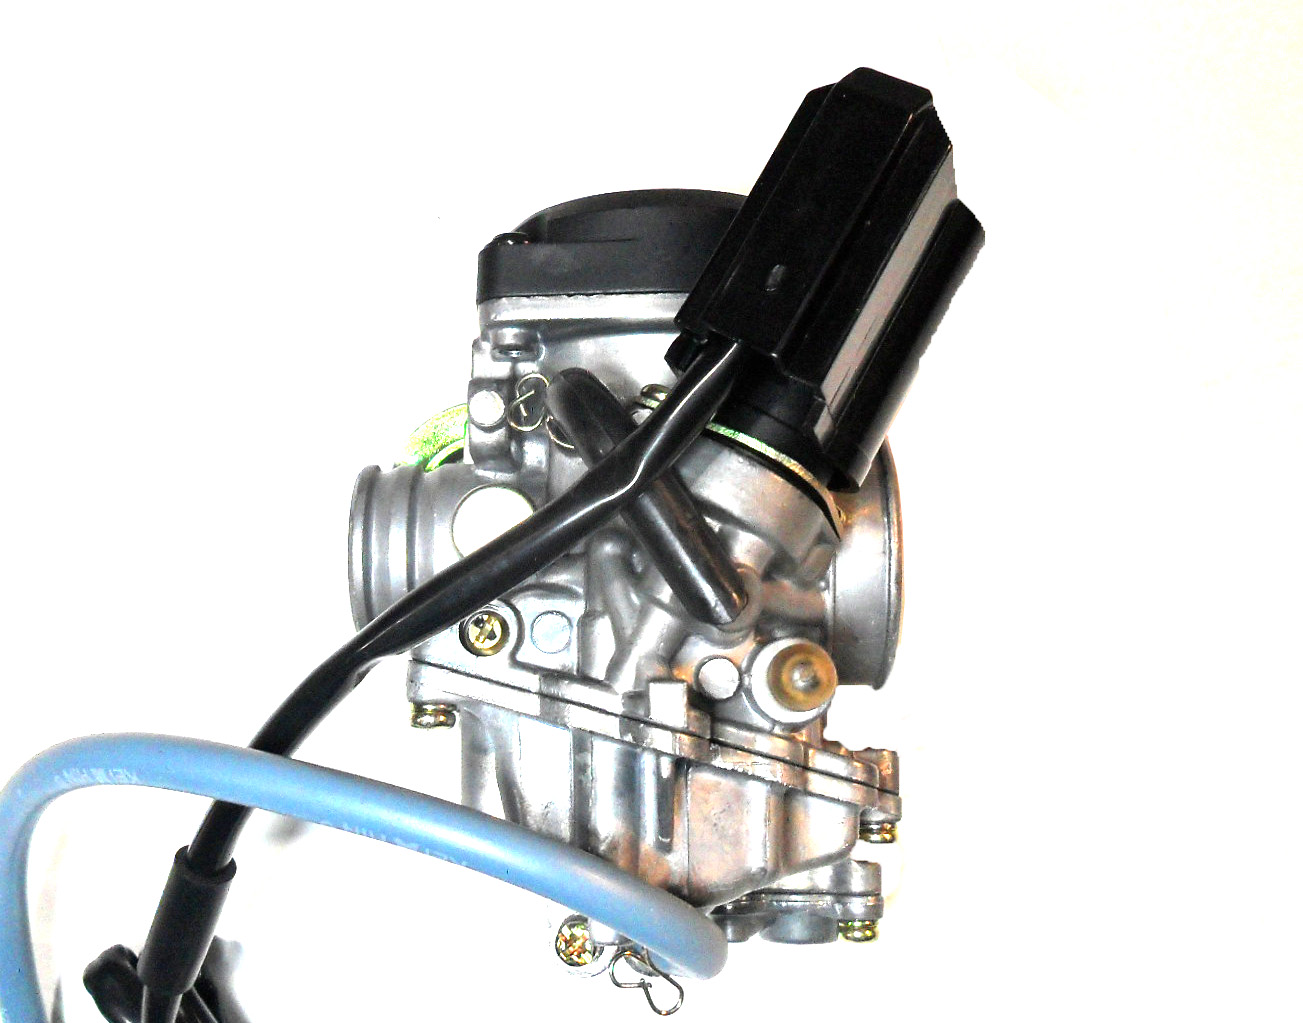 Runtong CVK PD19J Carburetor with booster pump Intake ID=19 OD=28 Air Box OD=40 Fits Most 49-100cc GY6 Belt Driven Scooters